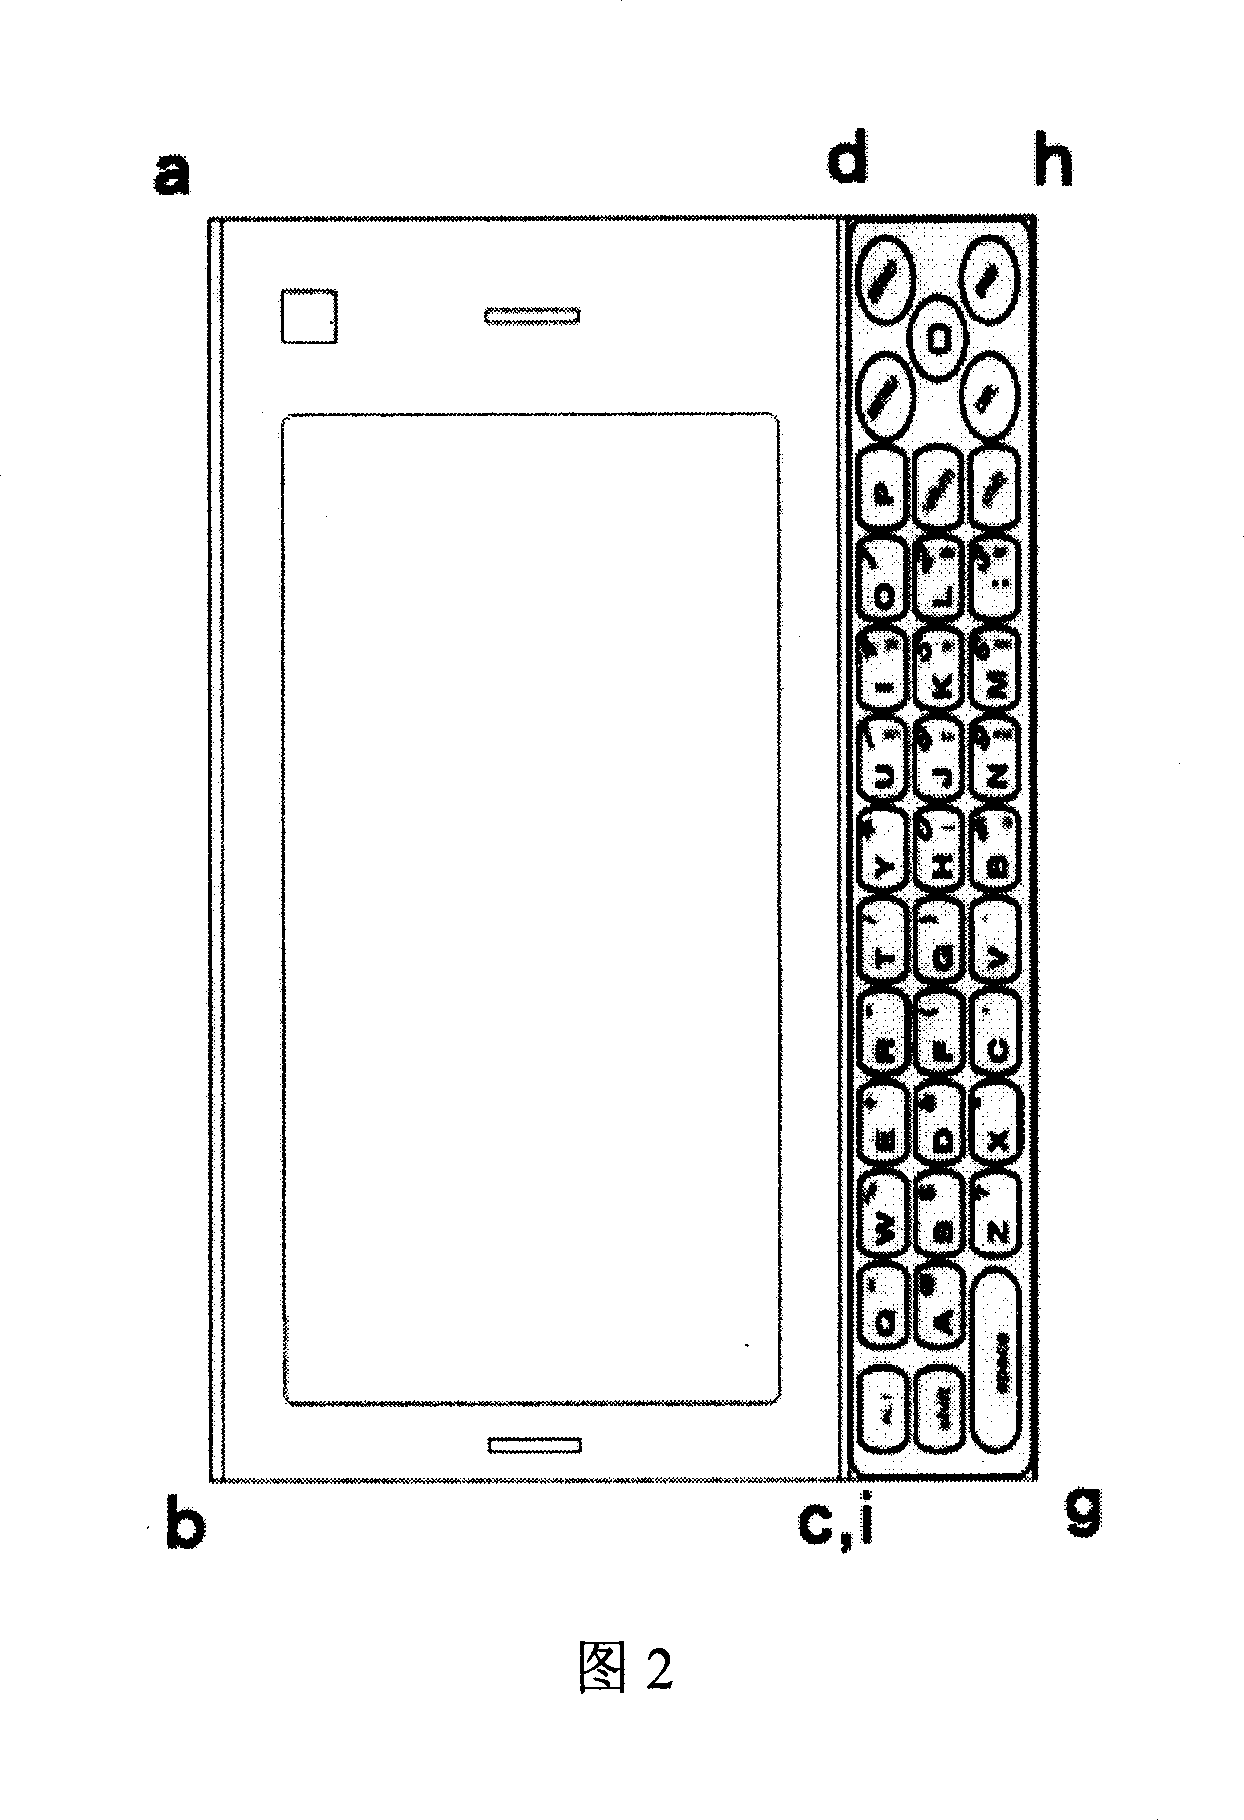 Hand-held information terminal device